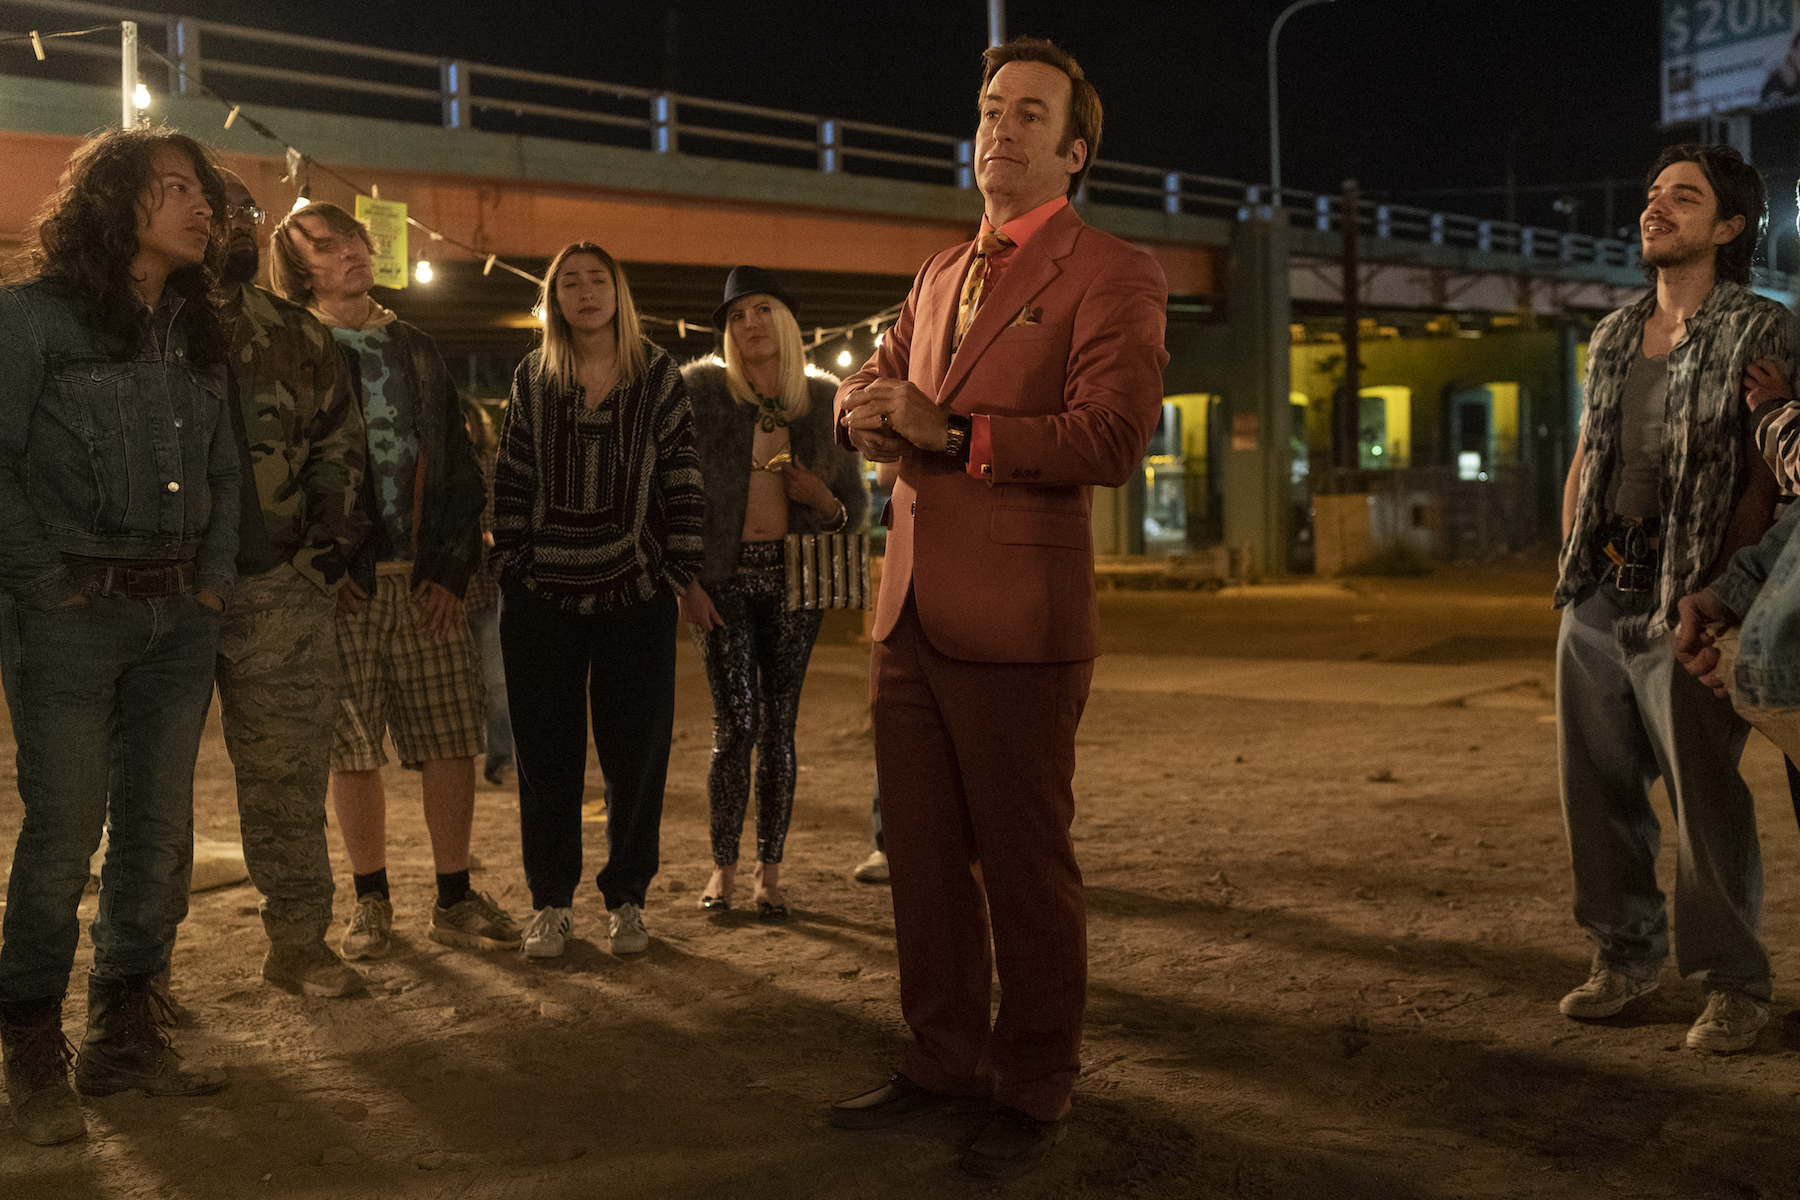 Bob Odenkirk as Jimmy McGill - Better Call Saul _ Season 5, Episode 1 - Photo Credit: Warrick Page/AMC/Sony Pictures Television